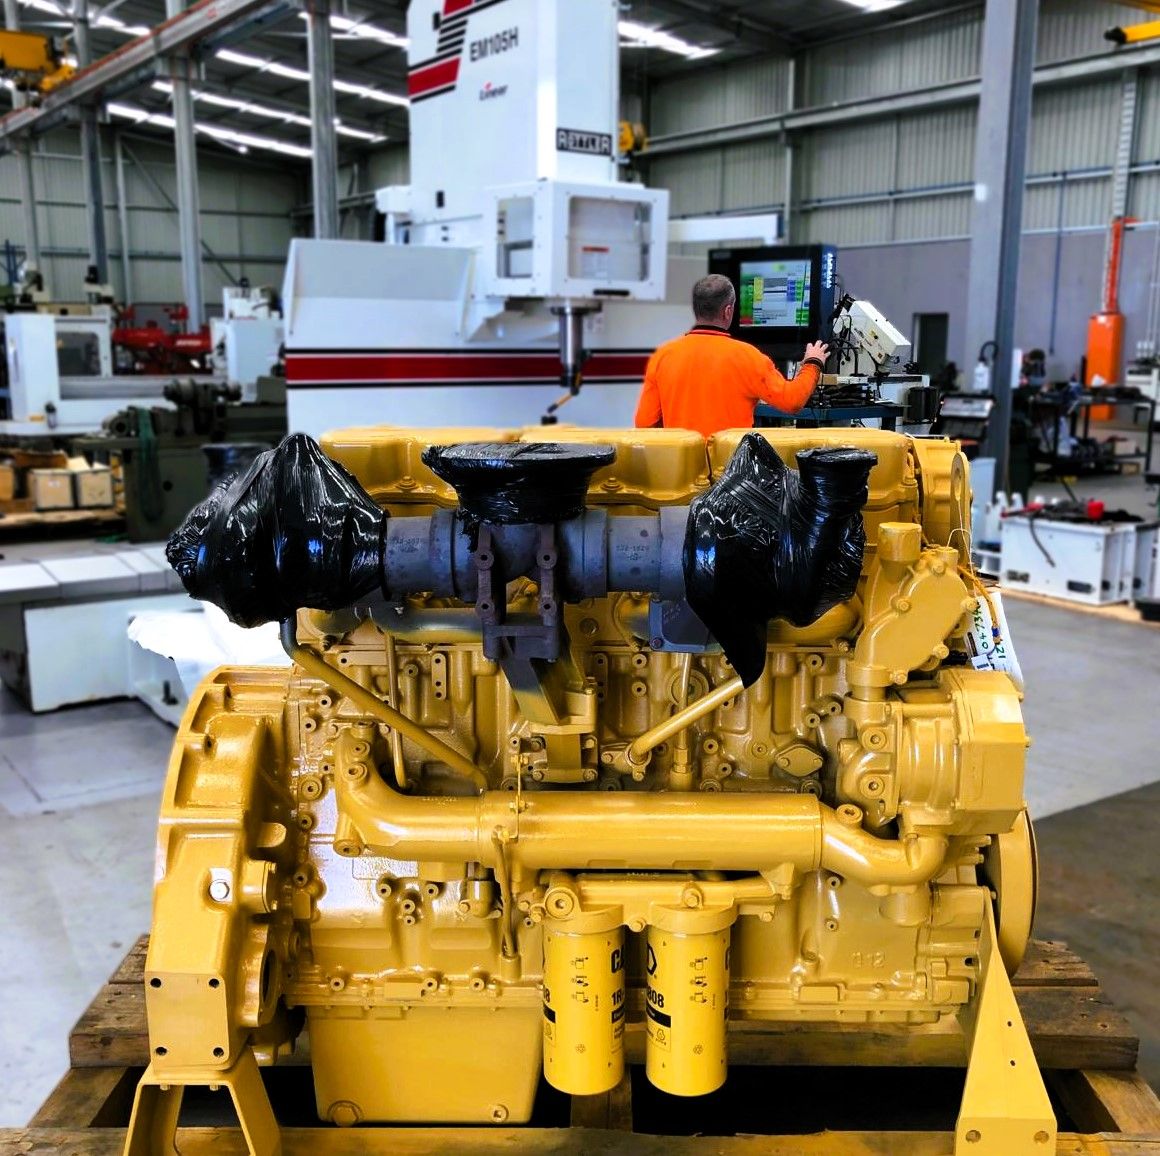 CaterpillarÂ® C18 Twin Turbo Engine Remanufacturers, Rebuilders, Reconditioners and Repairers in Australia